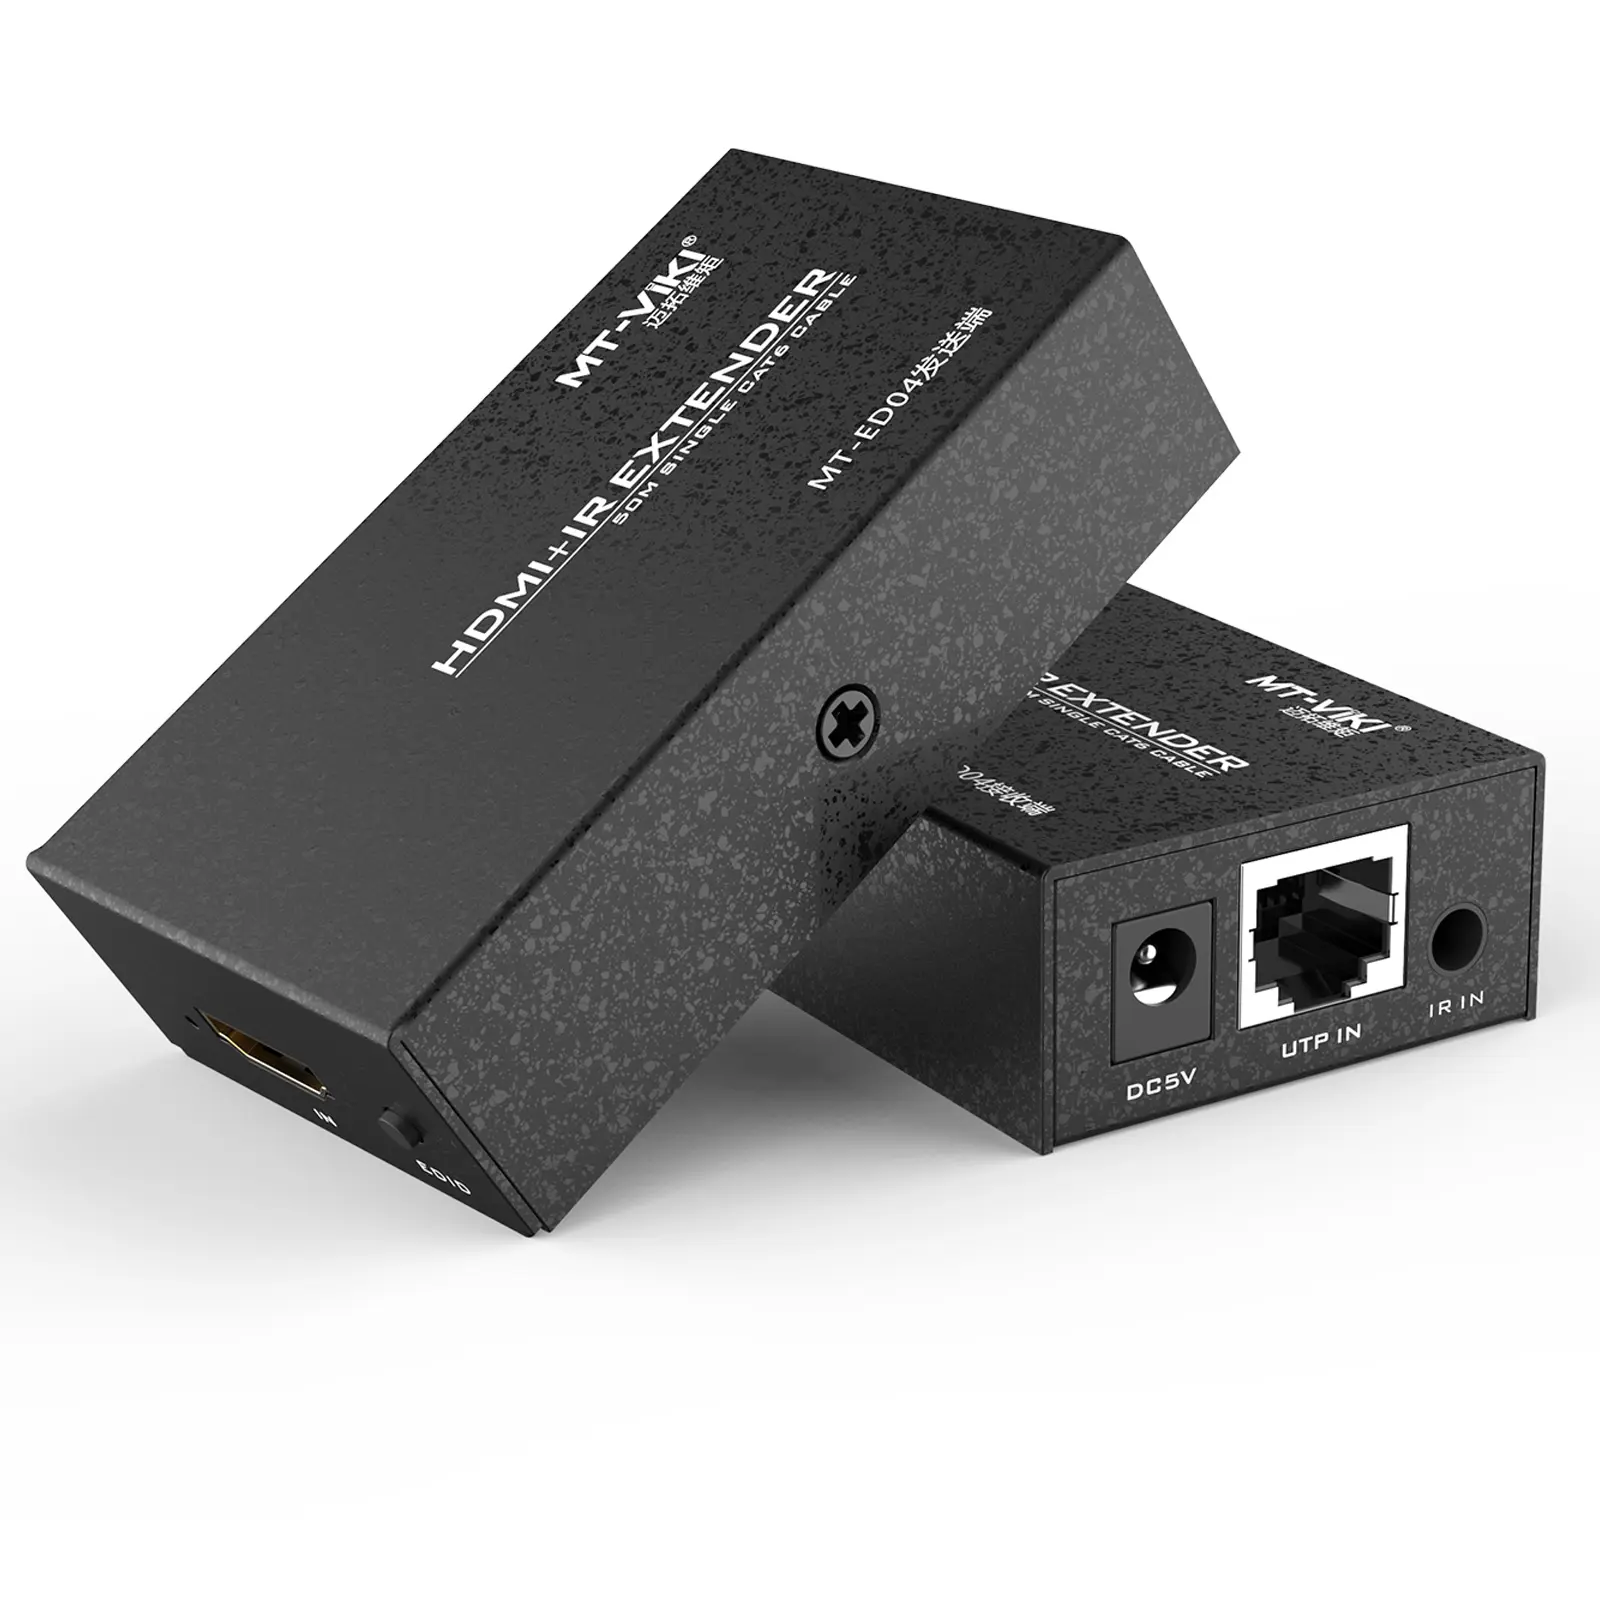 Hot Sale 1080p HDMI Extender over ethernet 50m, MT-VIKI HDMI Transmitter and Receiver over rj45 + Power Adapter